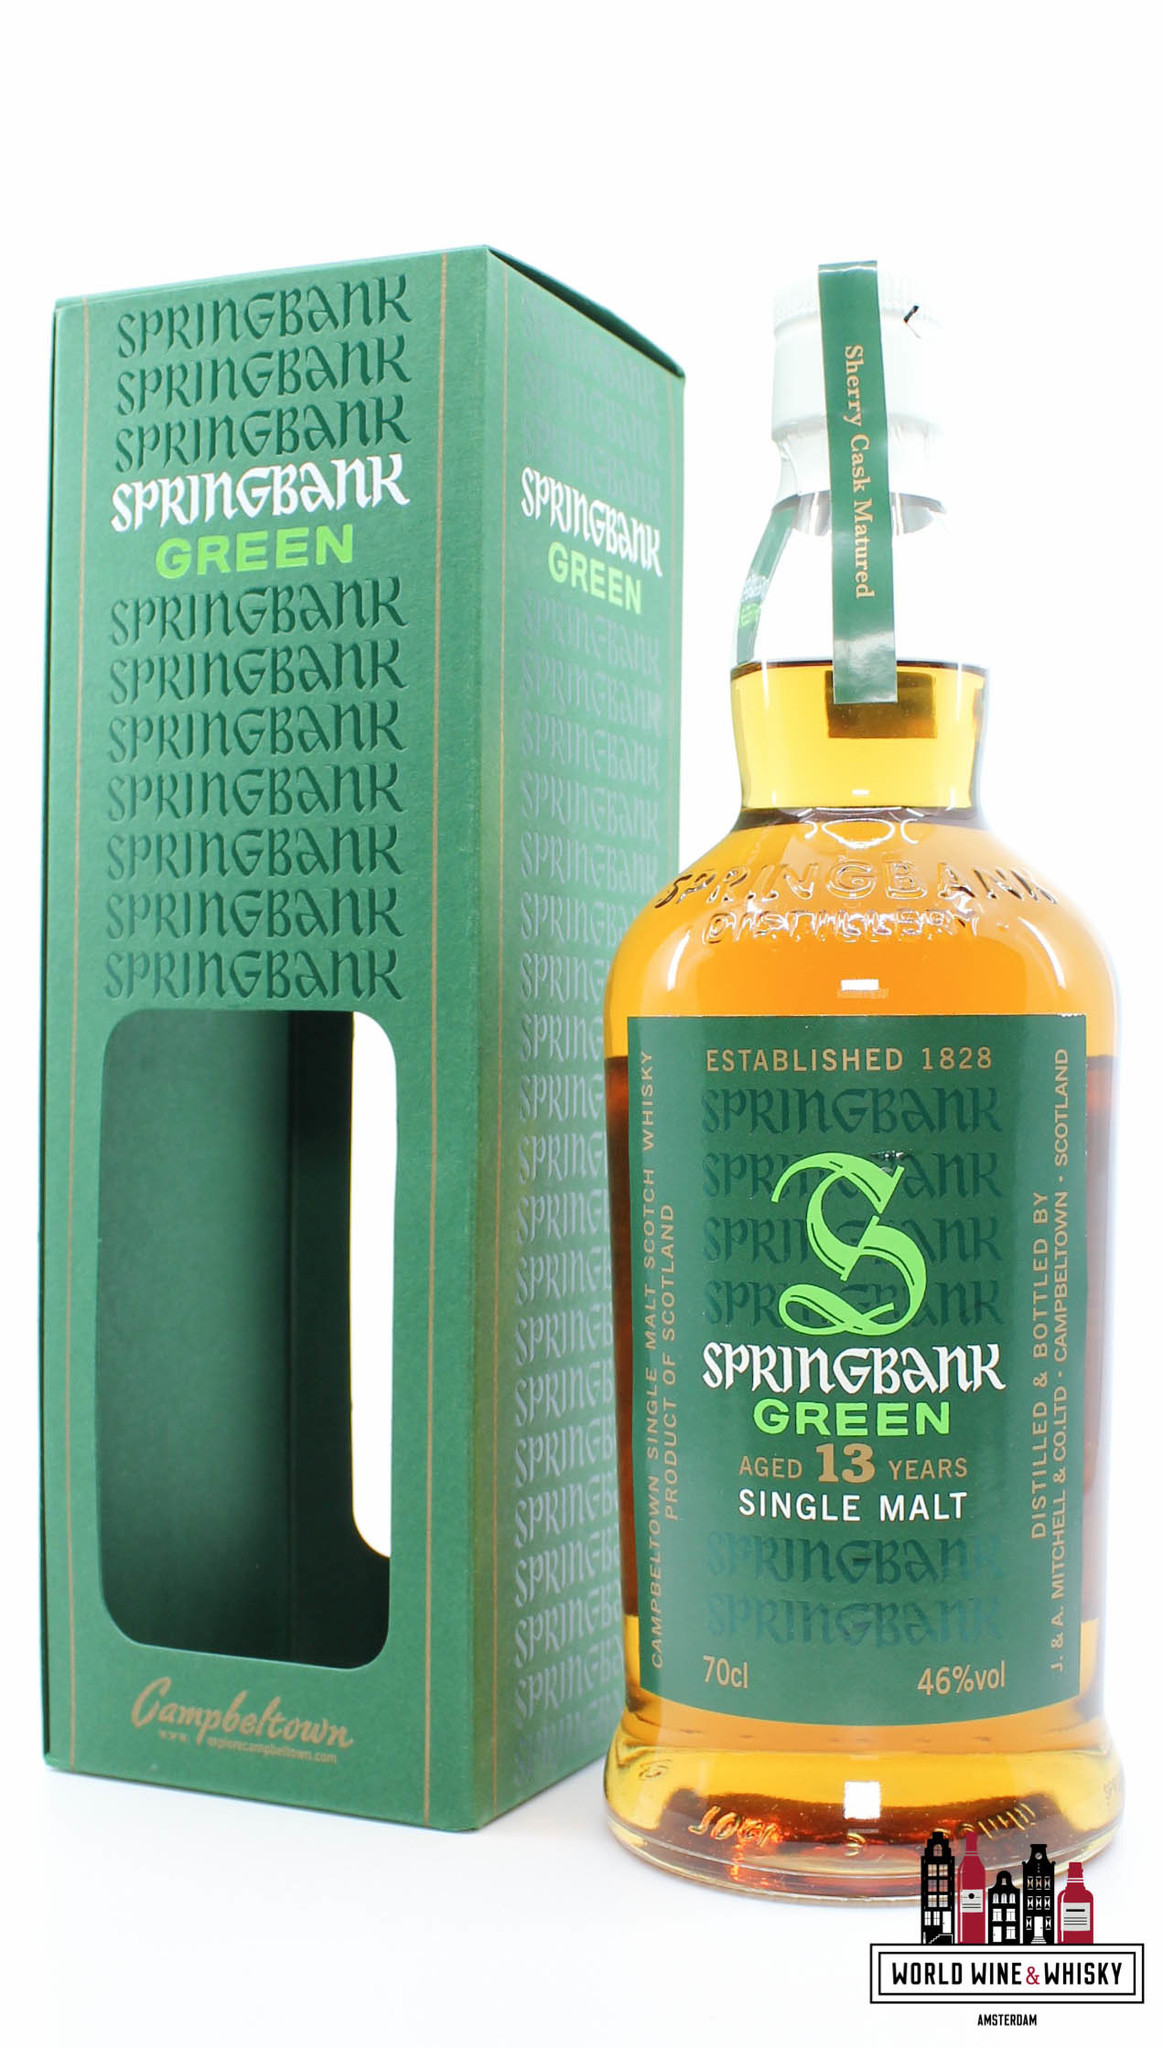 Springbank Springbank 13 Years Old 2015 - Green - Sherry Cask Matured 46% (1 of 9000)